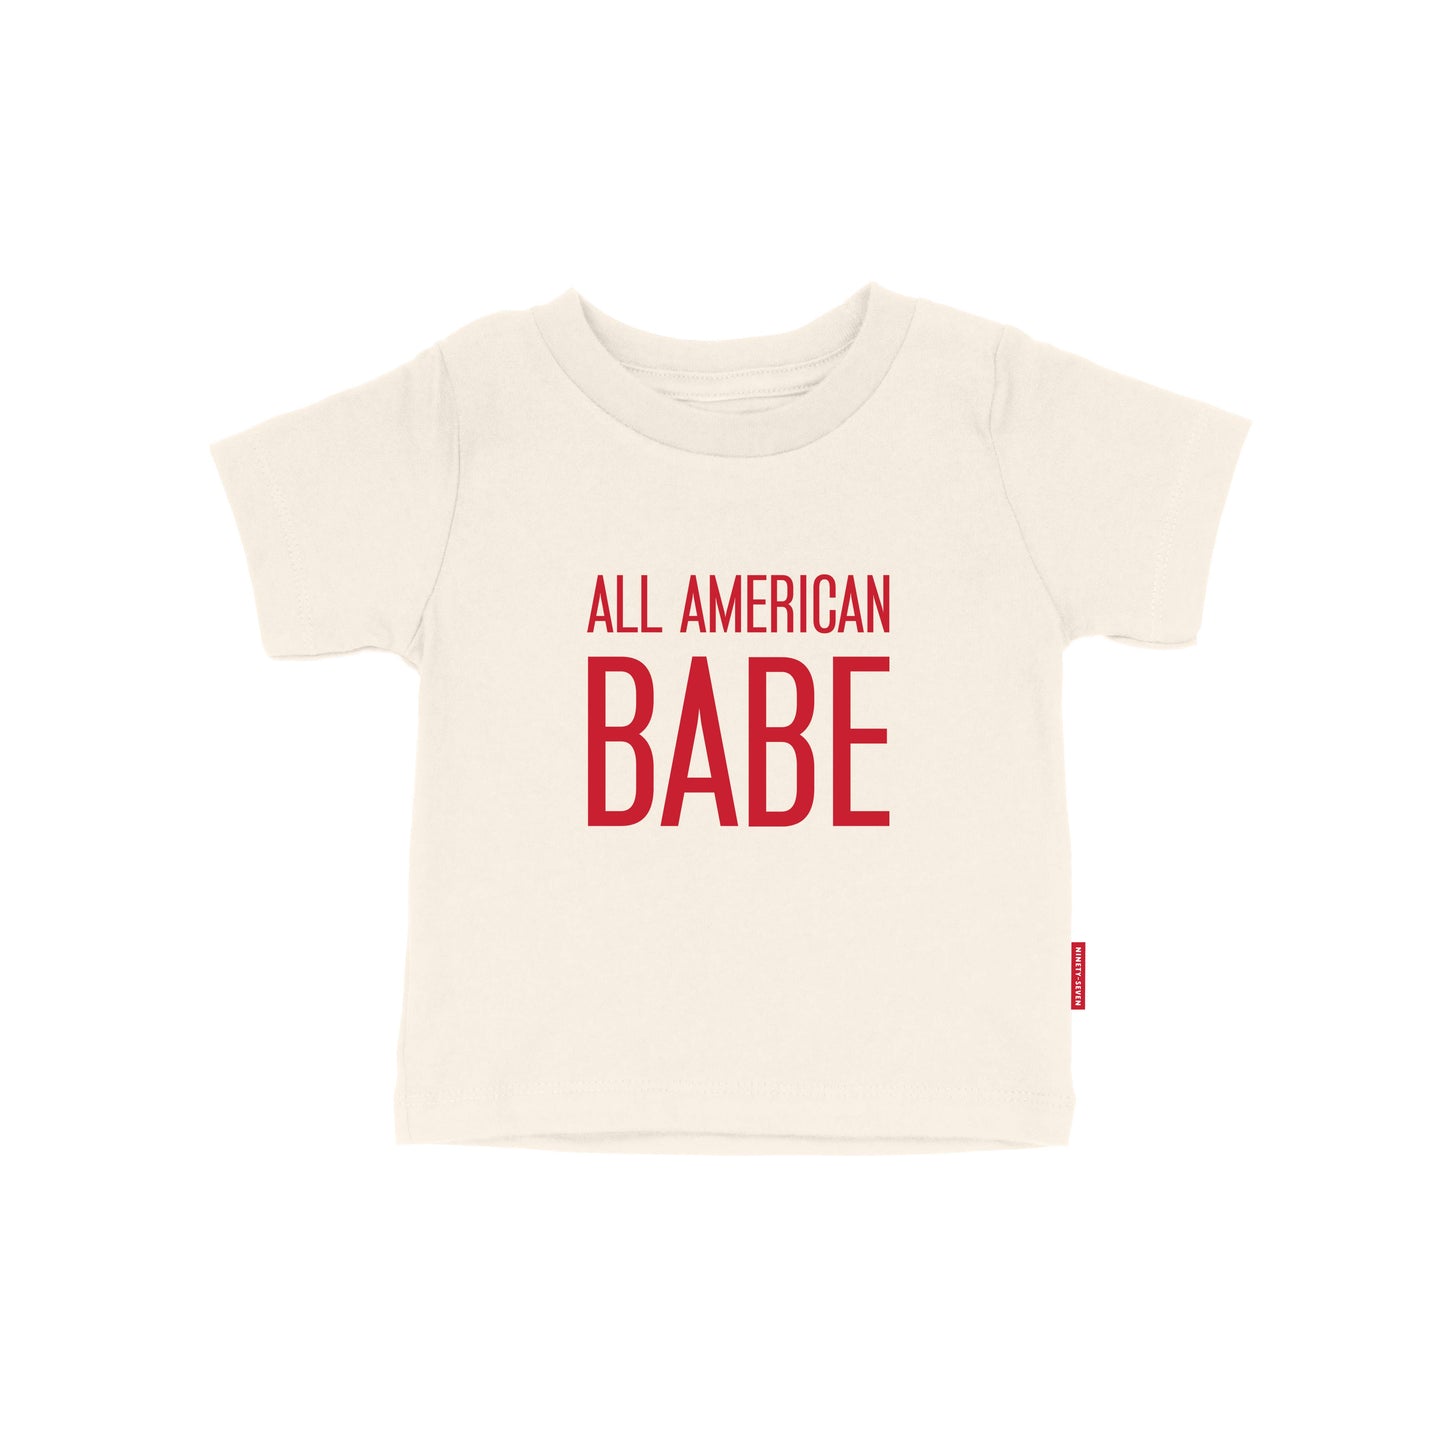 All American Babe - 4th of July Tee